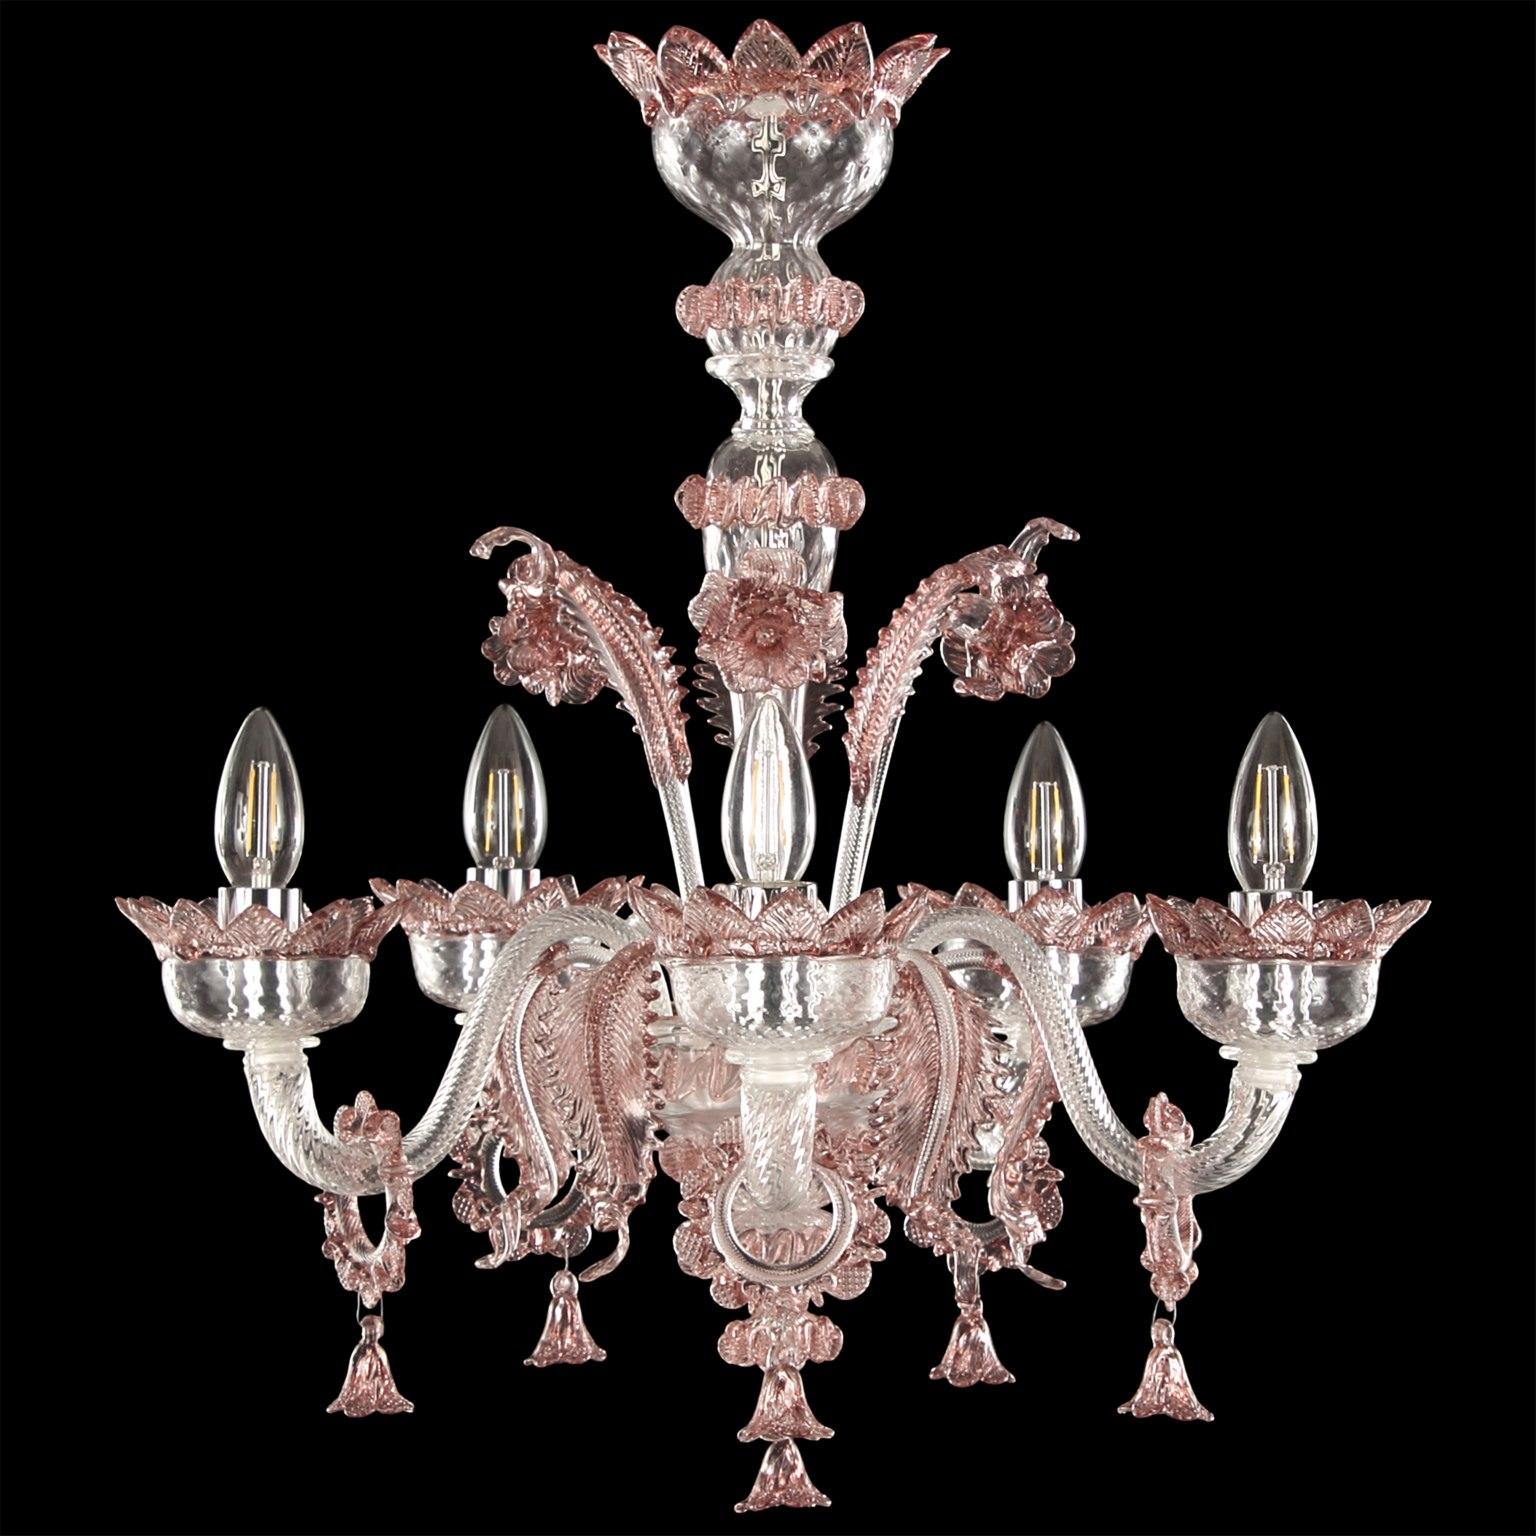 Classic chandelier 5 arms clear and amethyst Murano glass with rings by Multiforme.
The classic Murano glass chandelier, as it is in the collective imagination. As many other chandeliers in our collections, V-Classic 800 is designed with attention